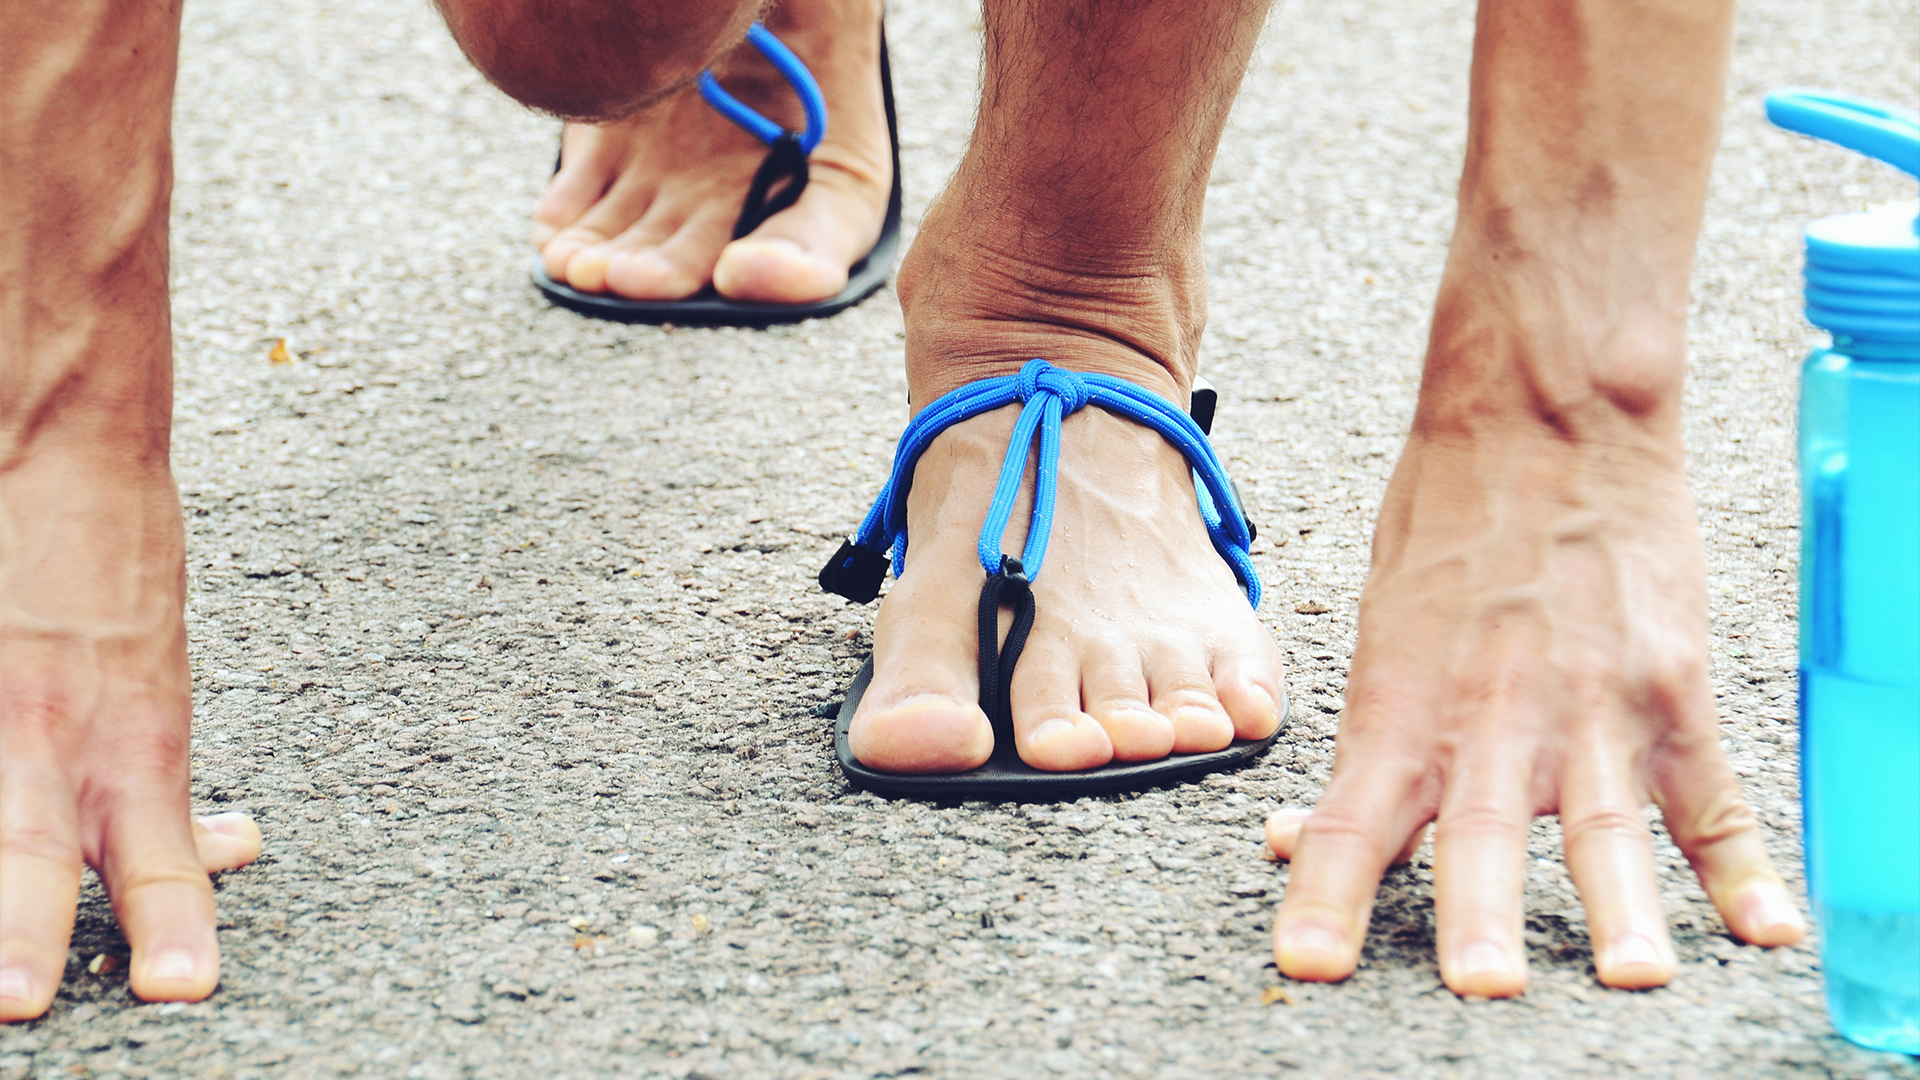 How Flip Flops or Sandals Can Affect the Feet